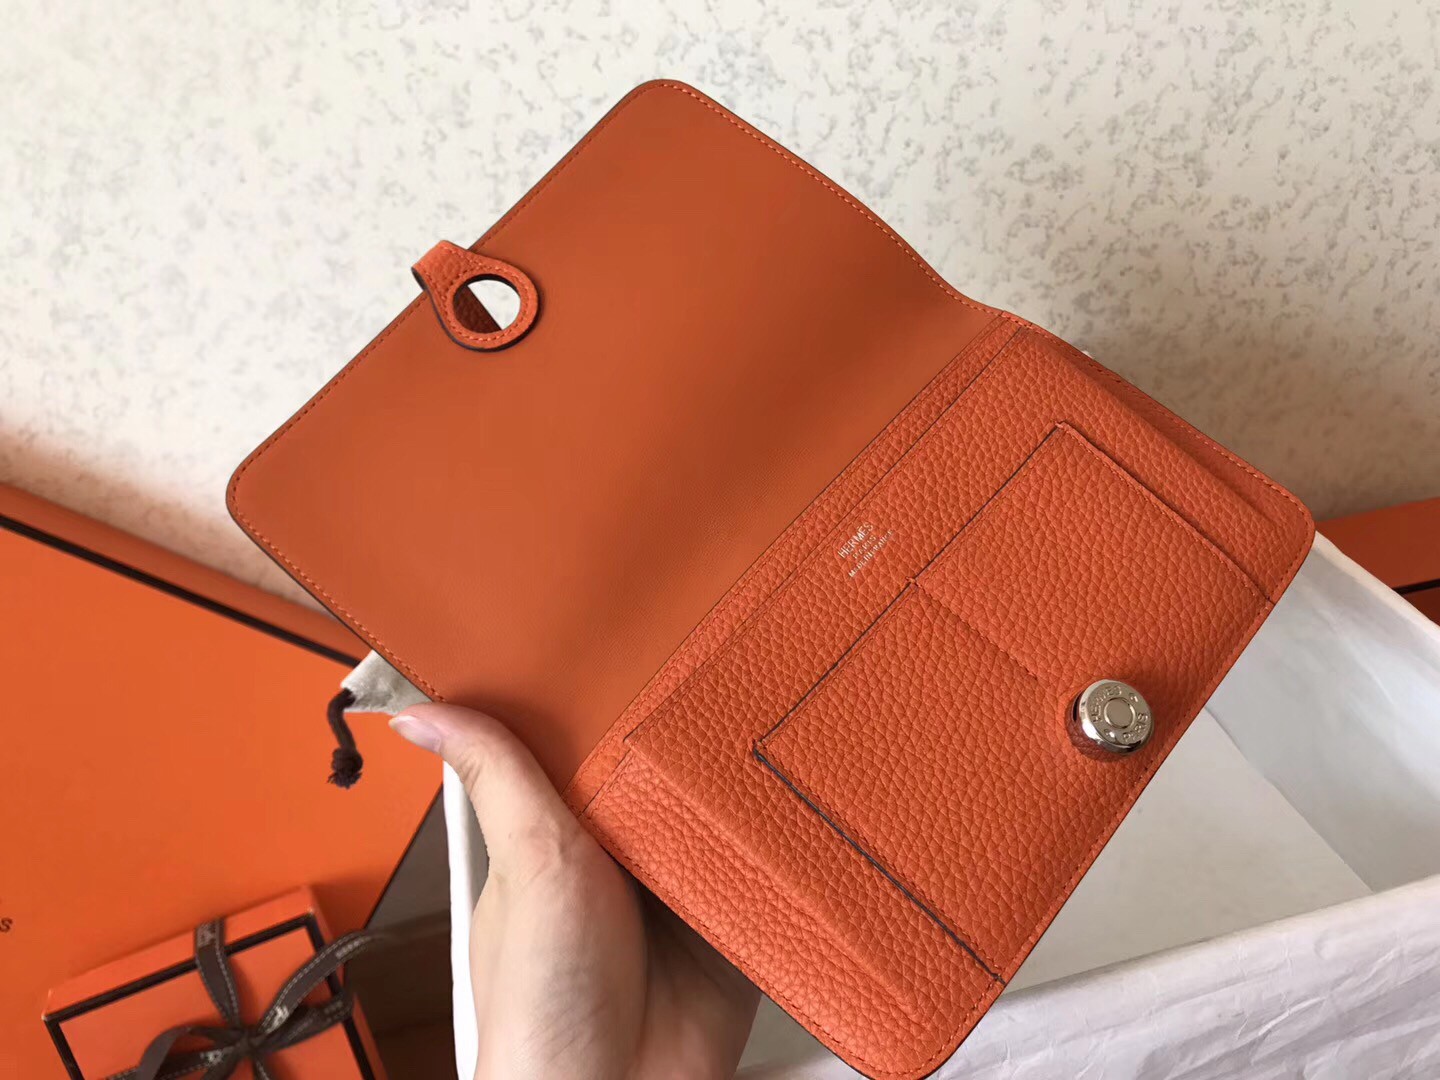 Replica Hermes Dogon Duo Wallet In Orange Clemence Leather